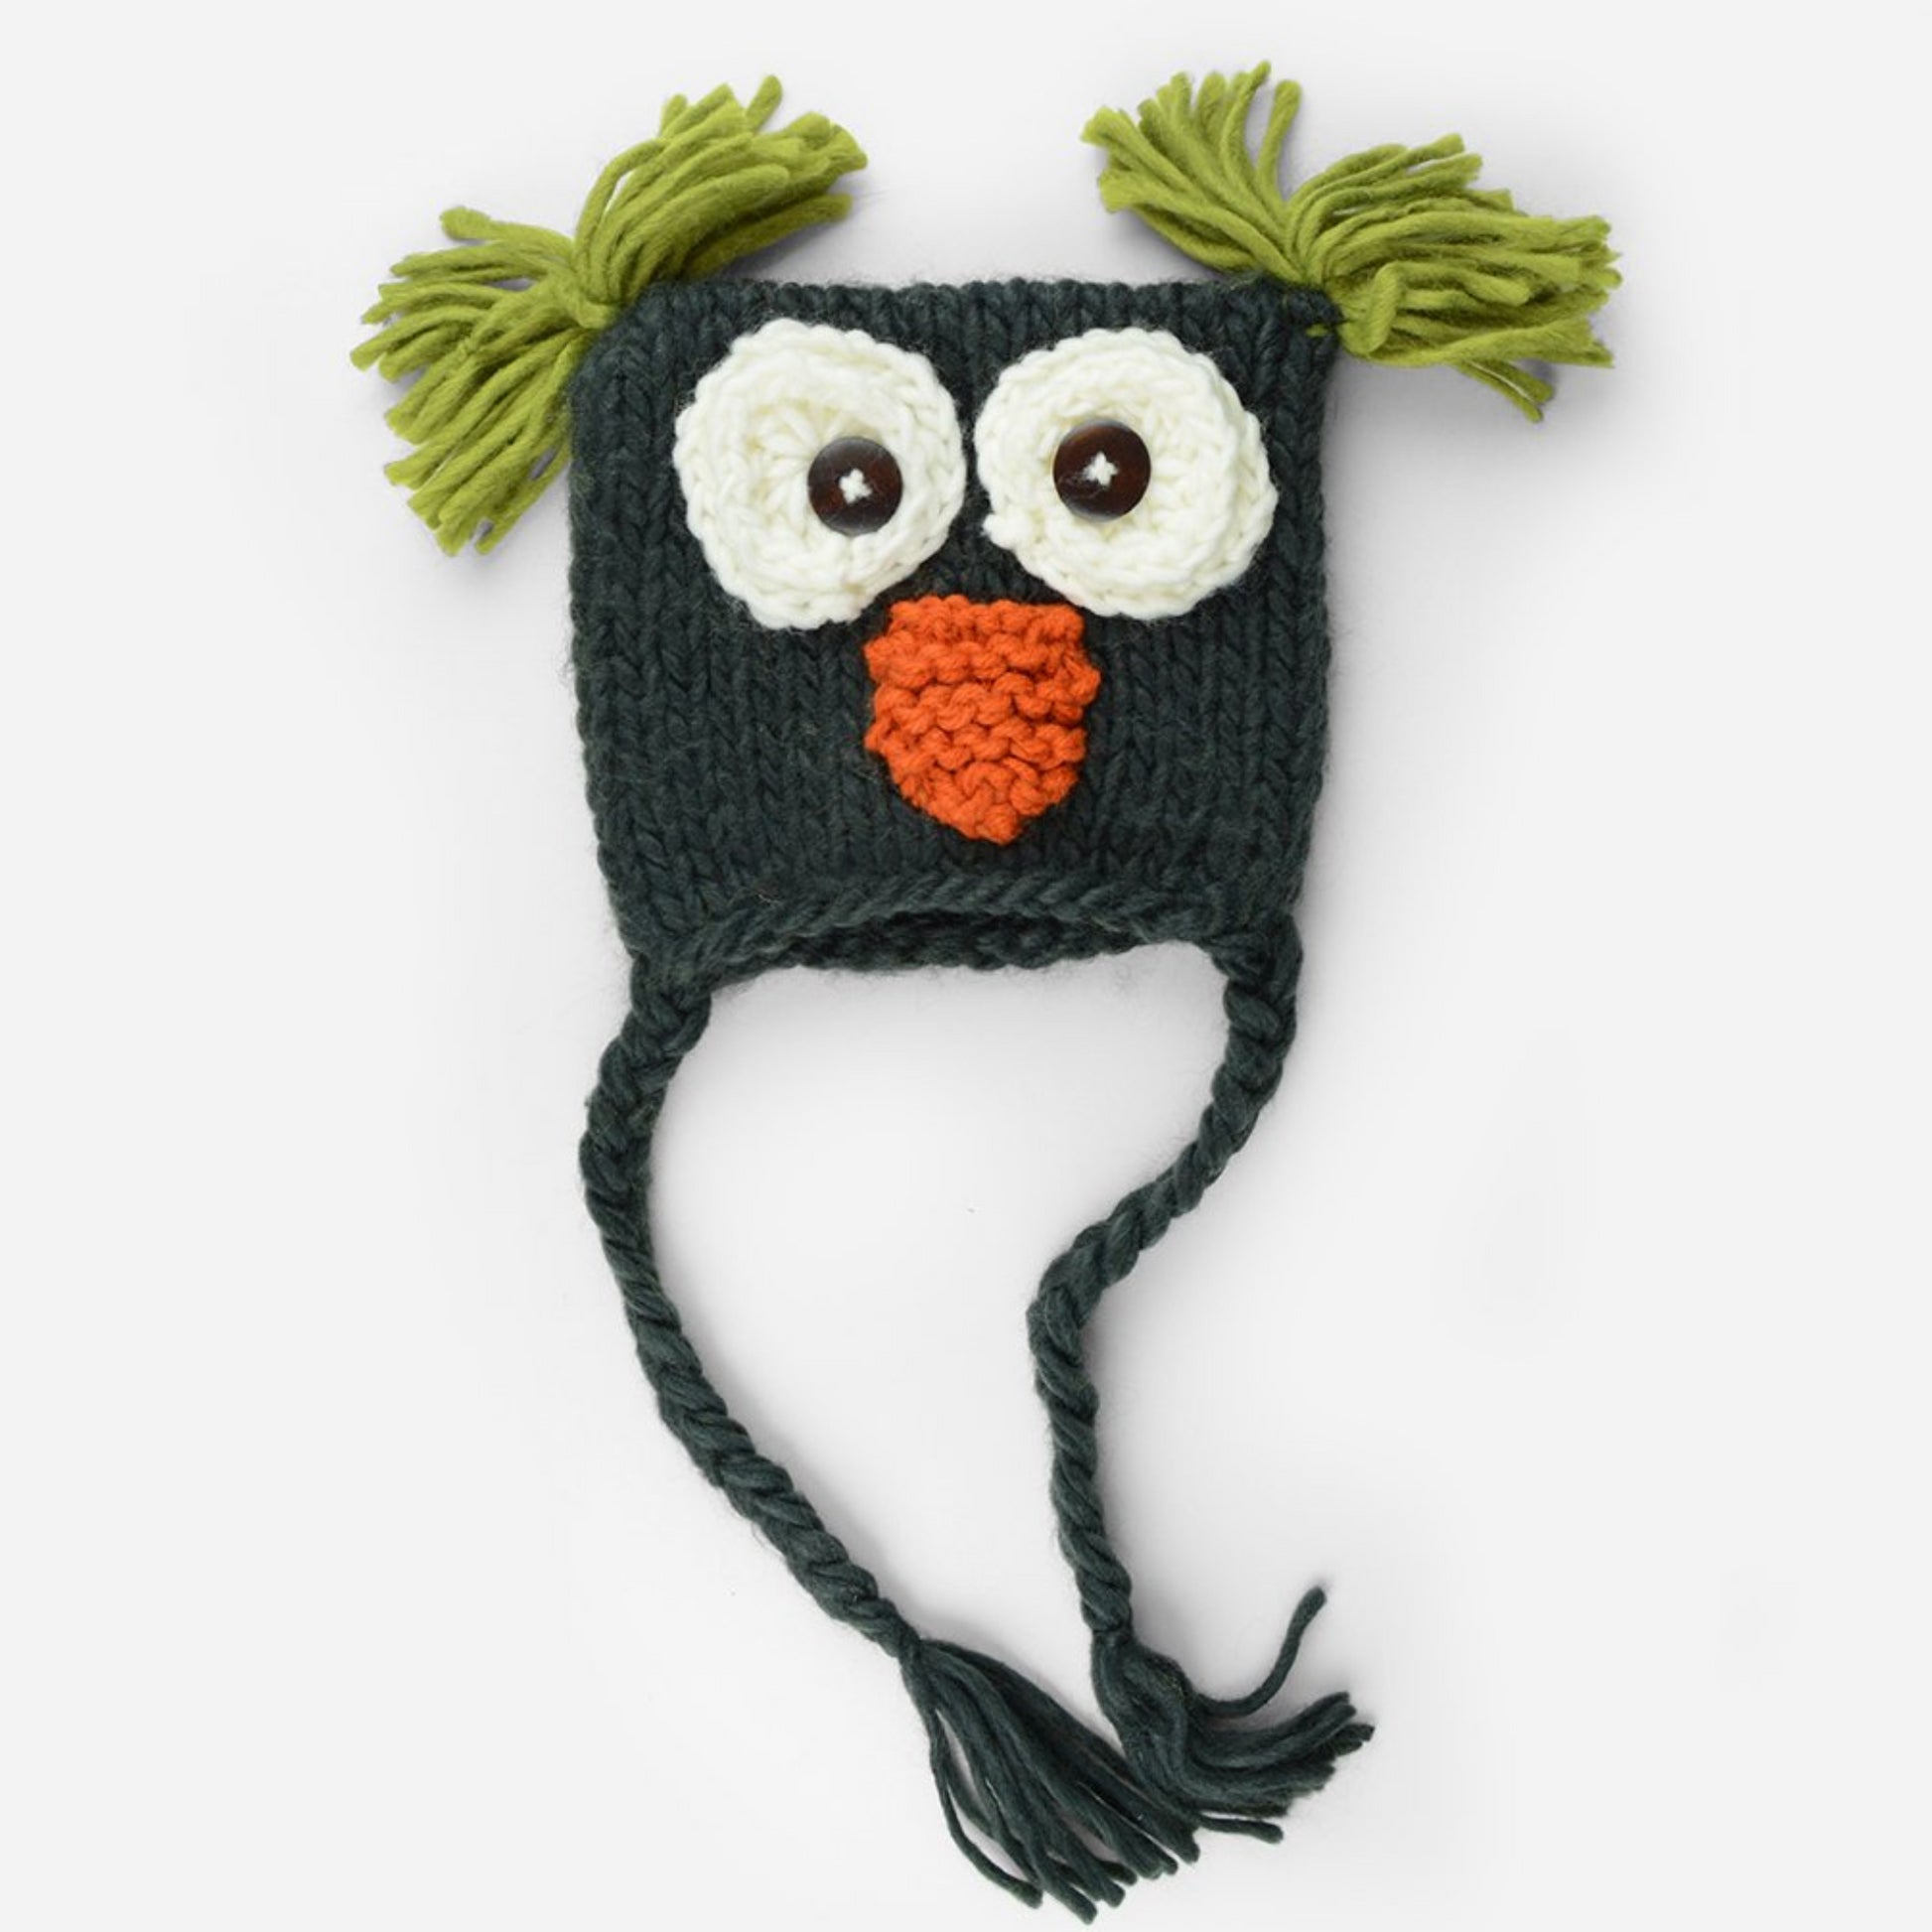 Hand Knit Owl hat with tassels and tufts in navy blue